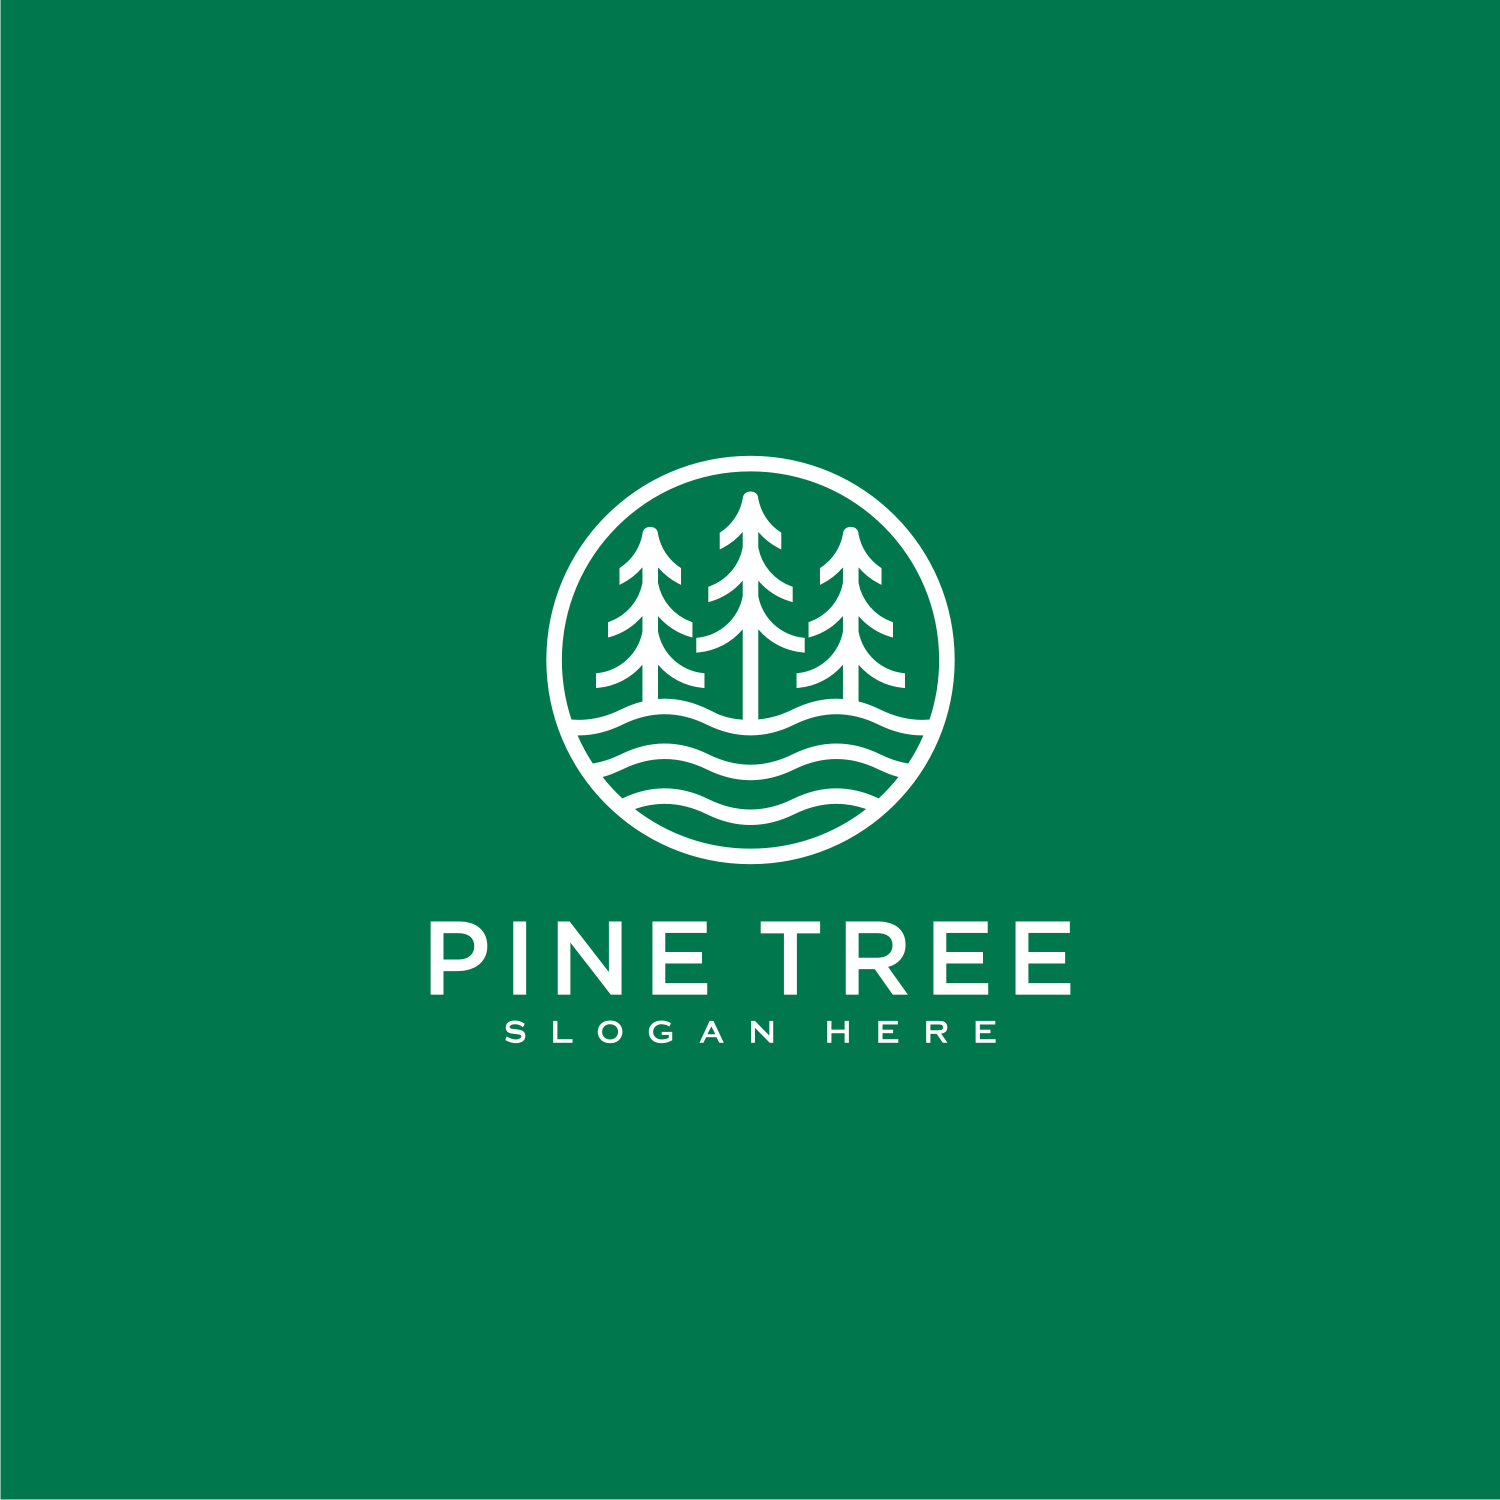 Pine Tree Beautiful Logo Vector Design Template Preview Image.